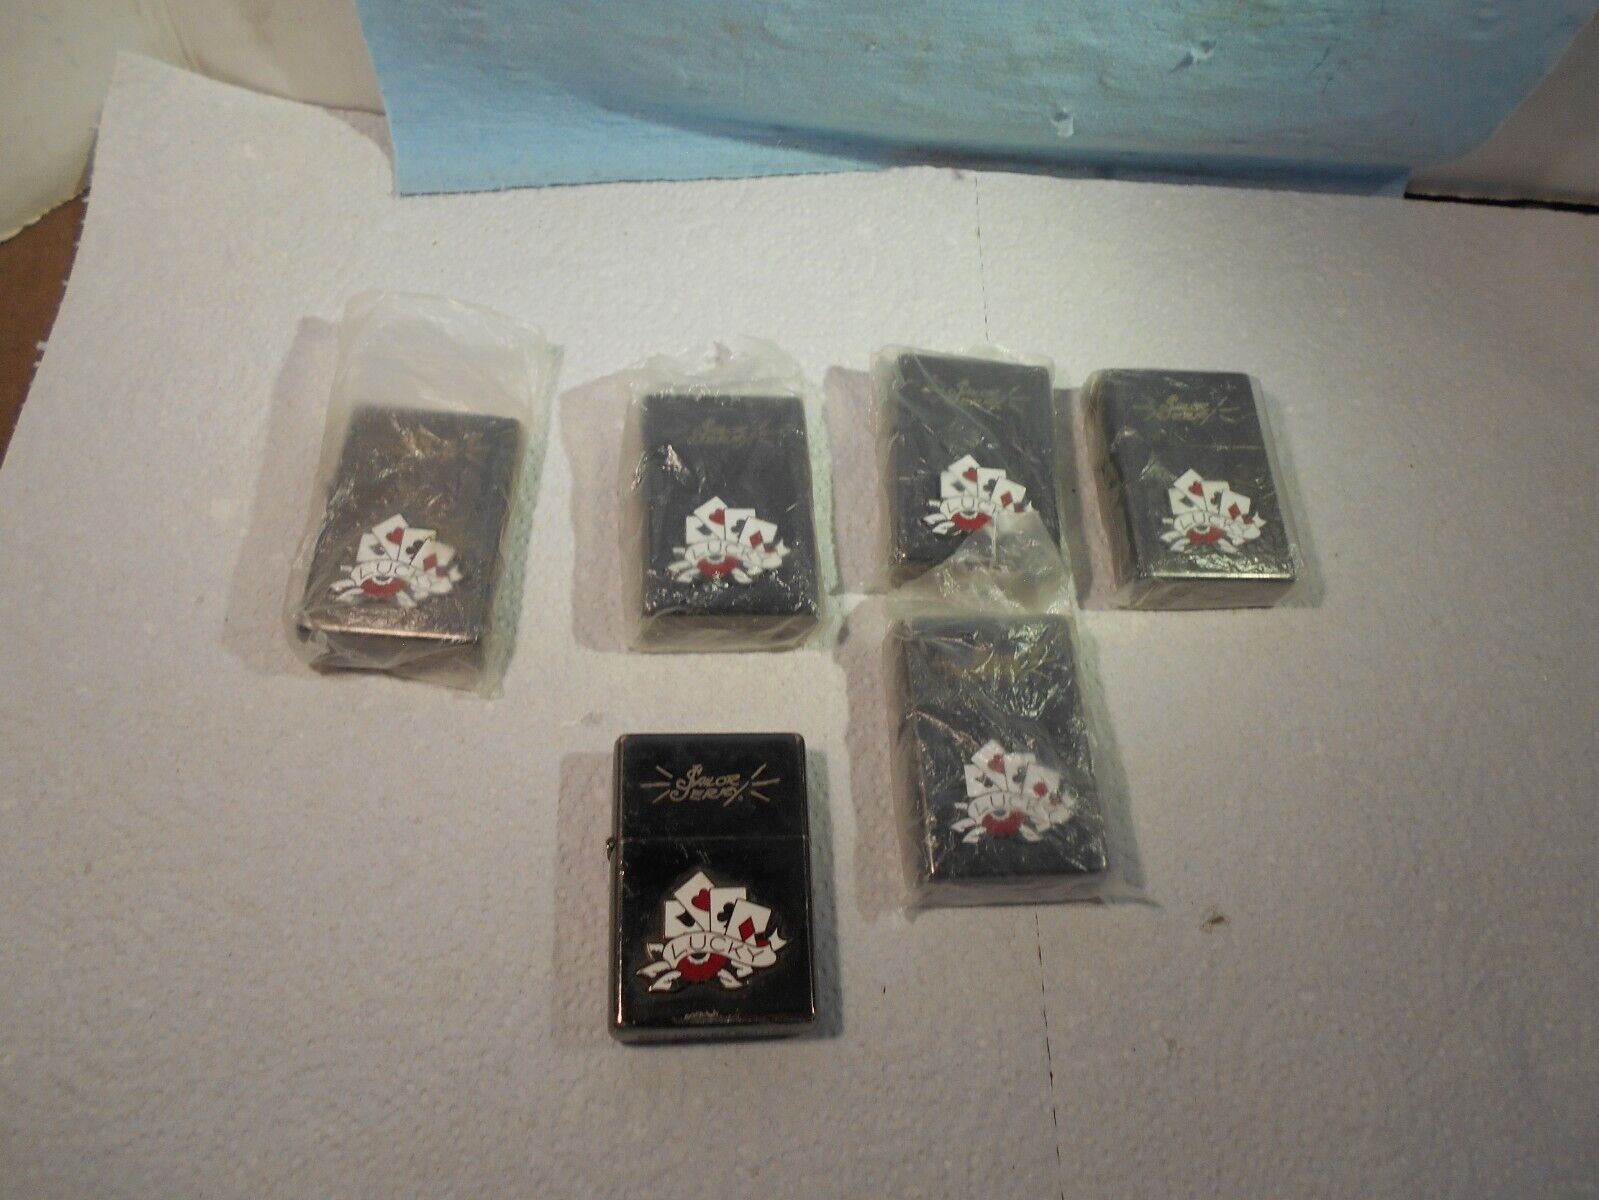 Lighters 5 Total 2007 Limited Edition "sailor Jerry" With Seals, Instructions.